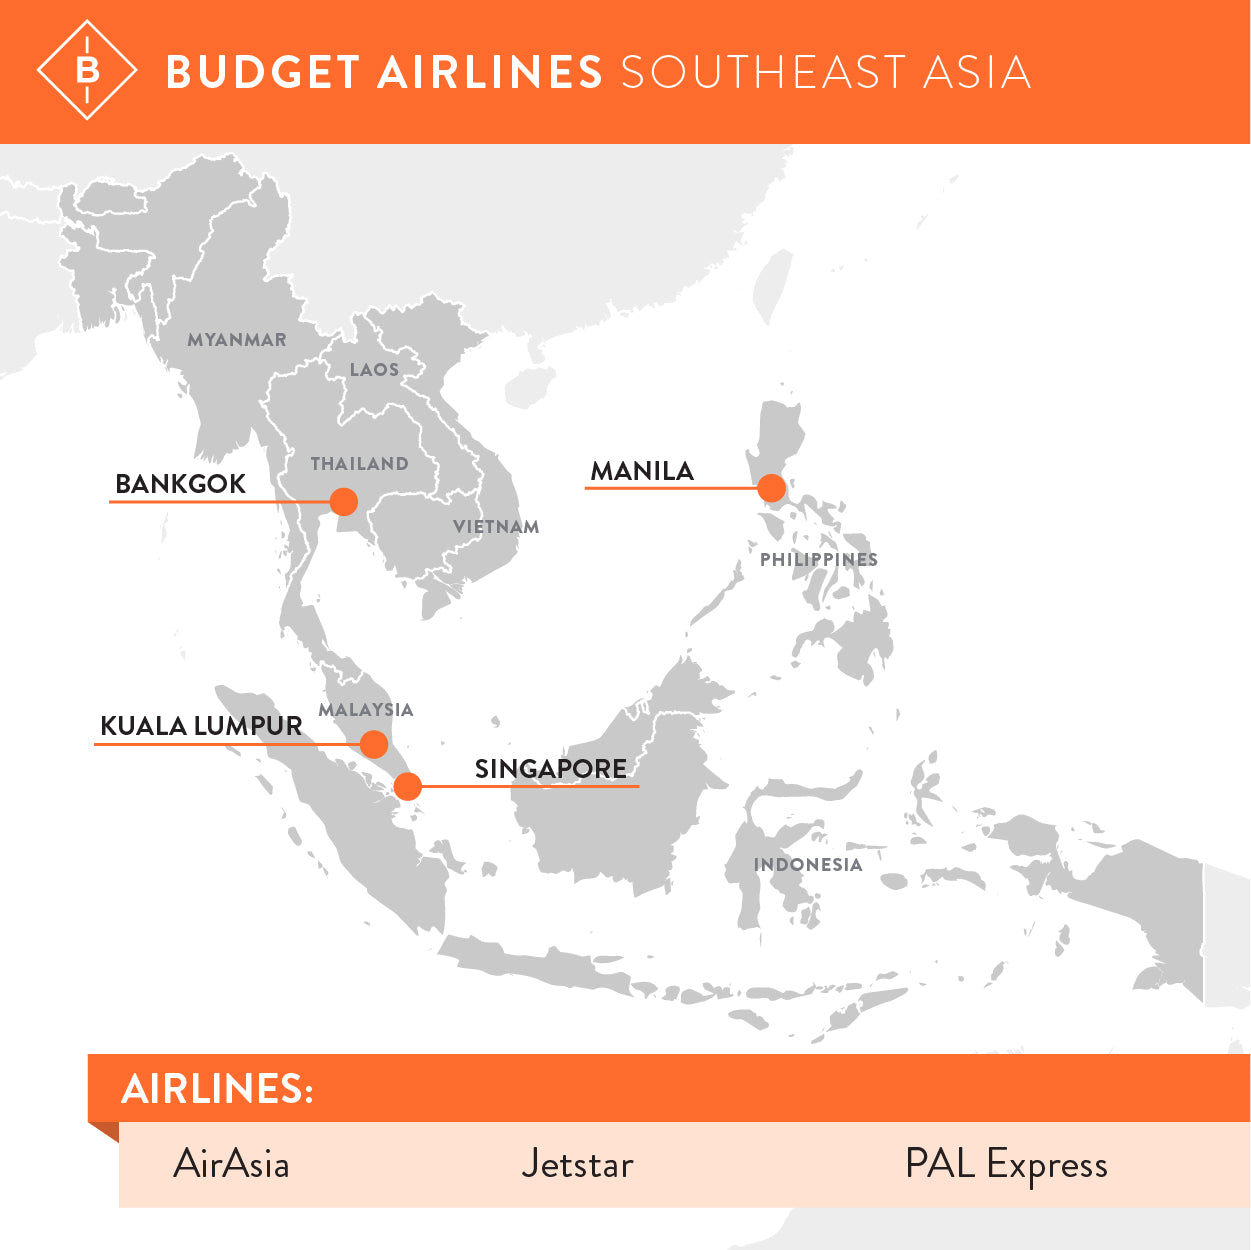 Low cost carrier hubs in South East Asia.